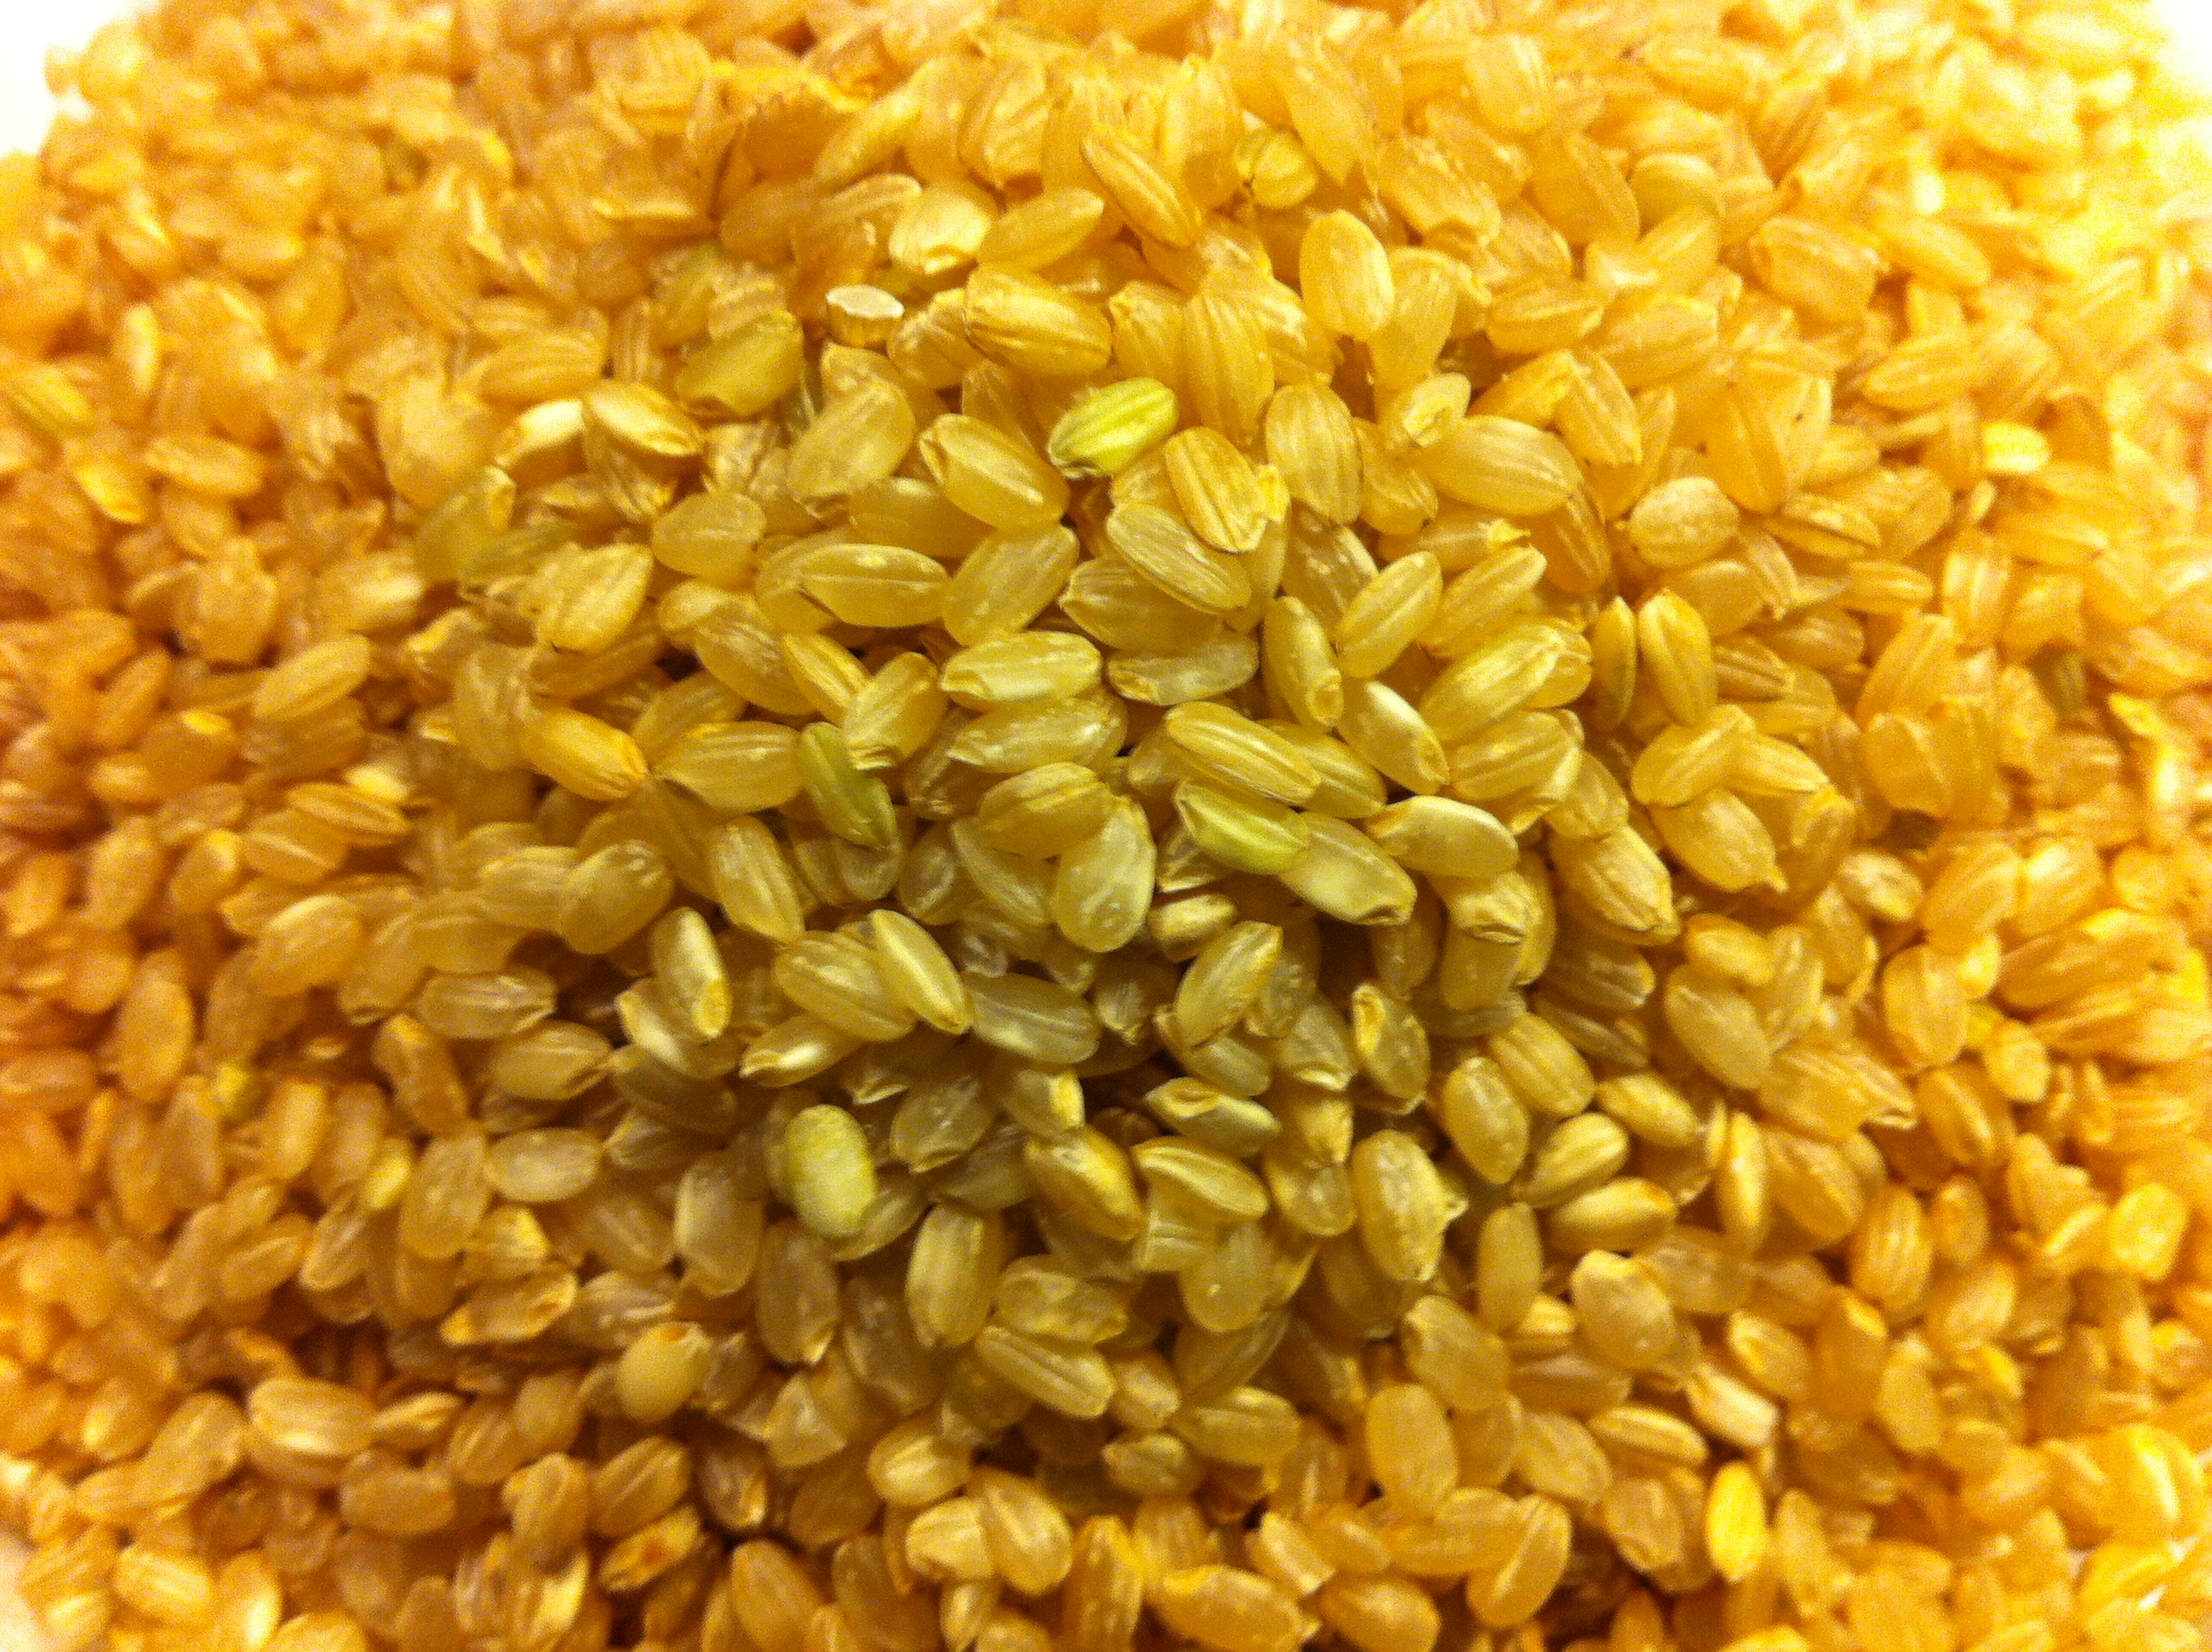 What is arsenic-free rice?